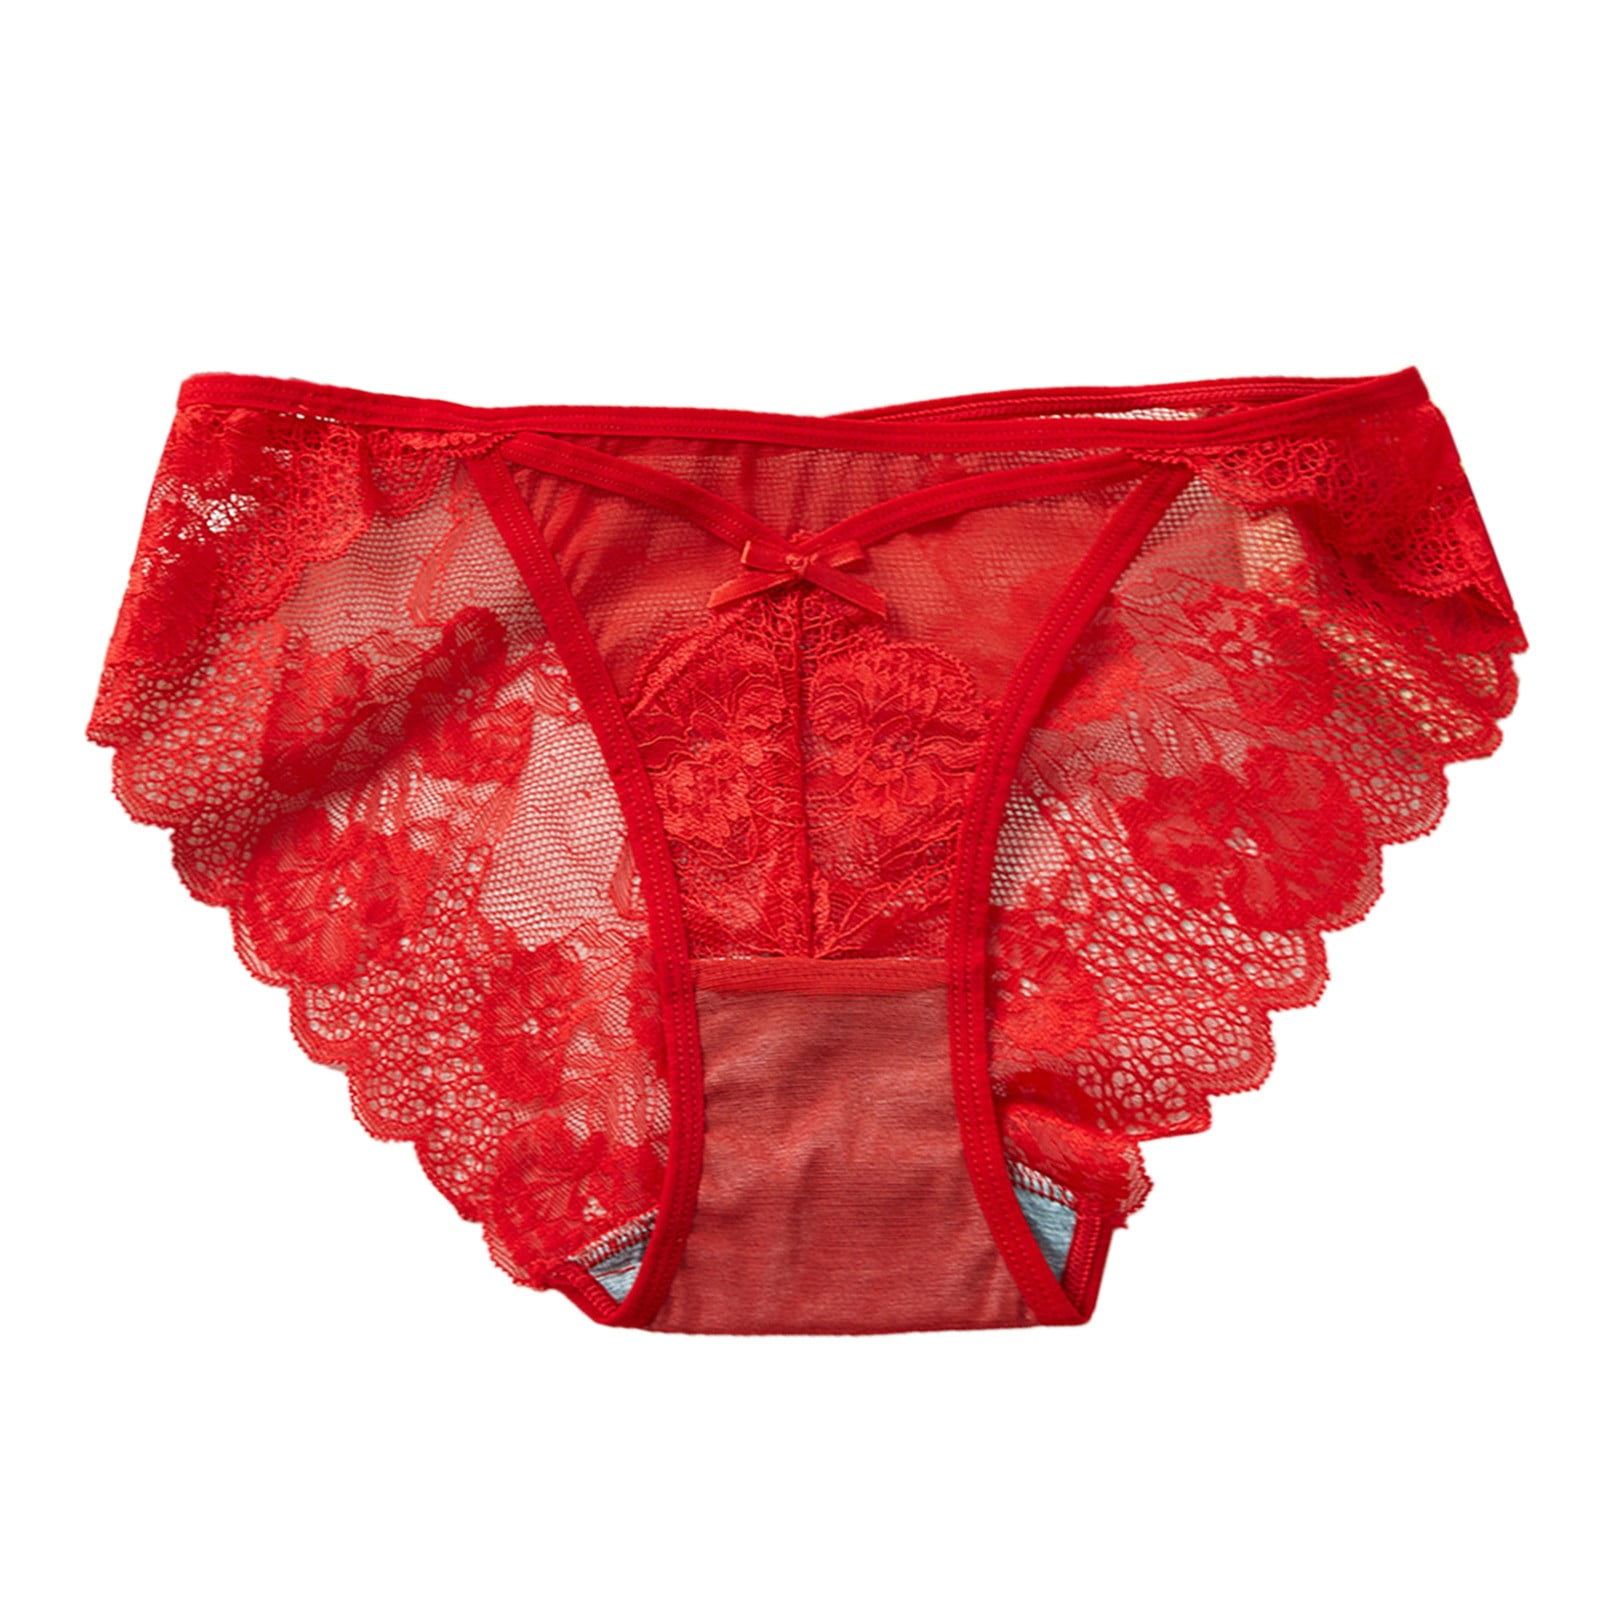 Women Panties Lingerie Womens Red Lace Breathable Lace Hollow Out